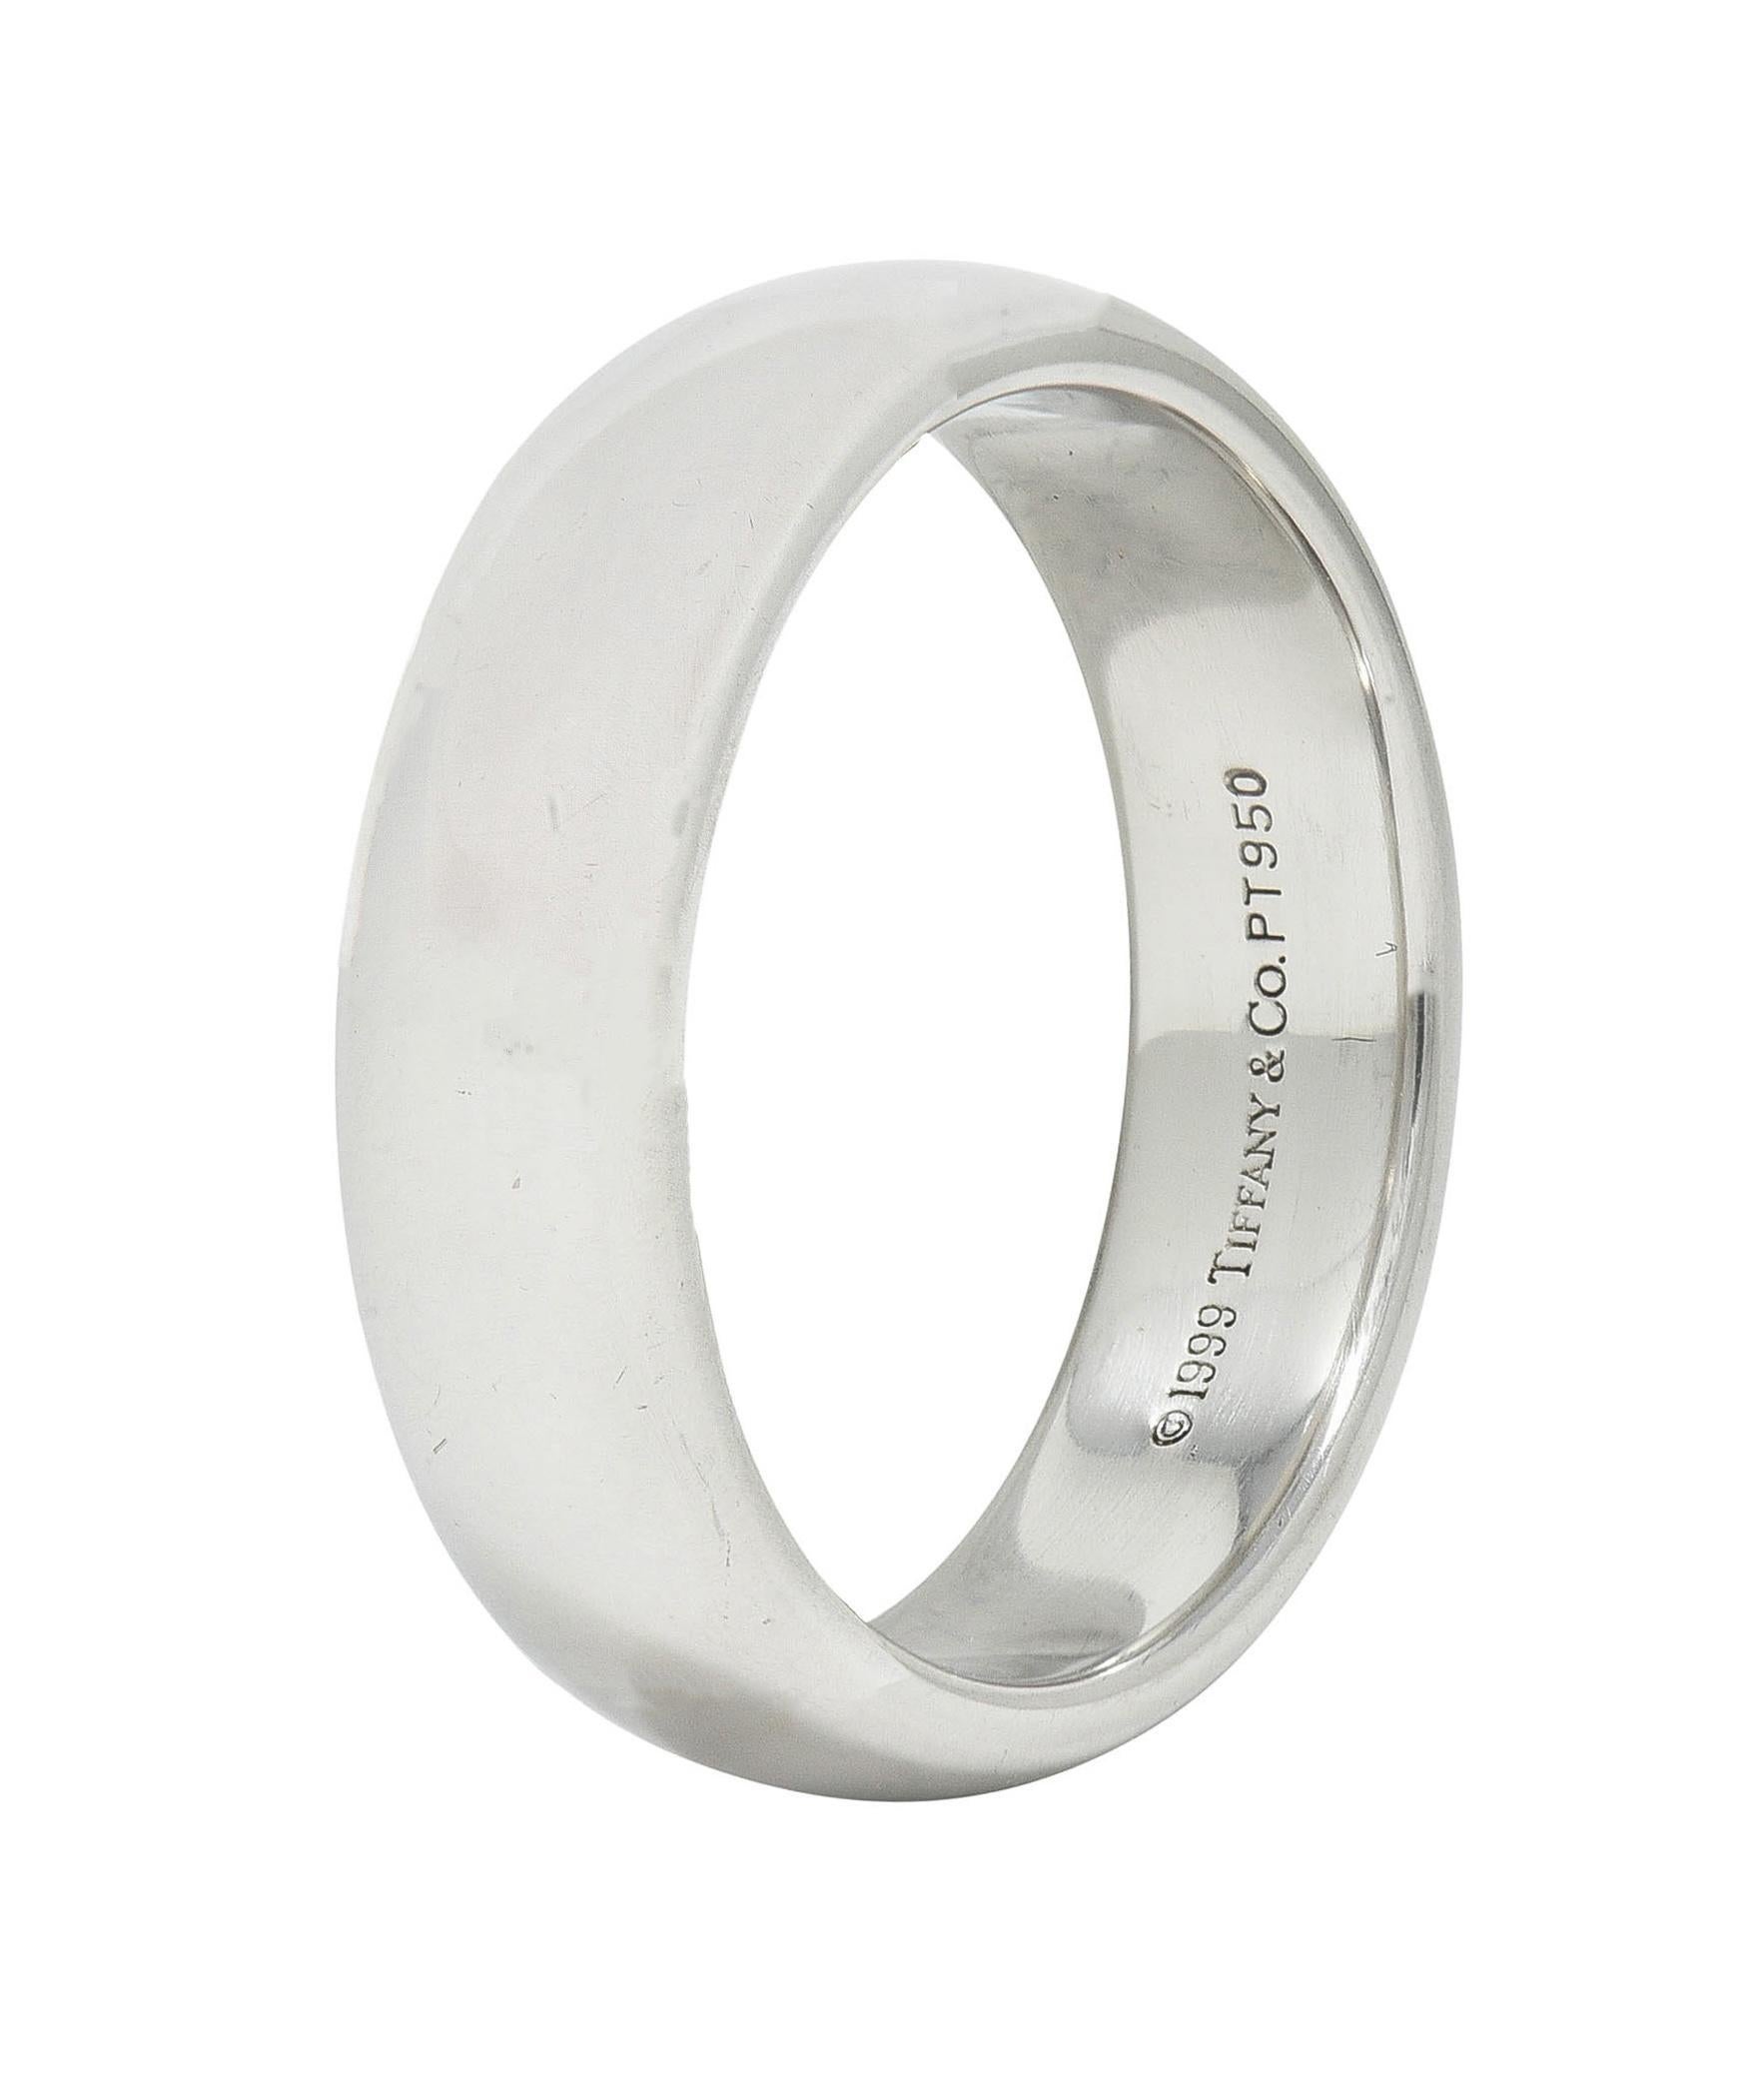 Designed as a comfort fit style band with rounded edges
Completed by a high polish
Stamped PT950 for platinum
Fully signed for Tiffany & Co.
Circa: 1999; via dated inscription
Ring Size: 9 and sizable
Measures 6.0 mm north to south and sits 2.0 mm